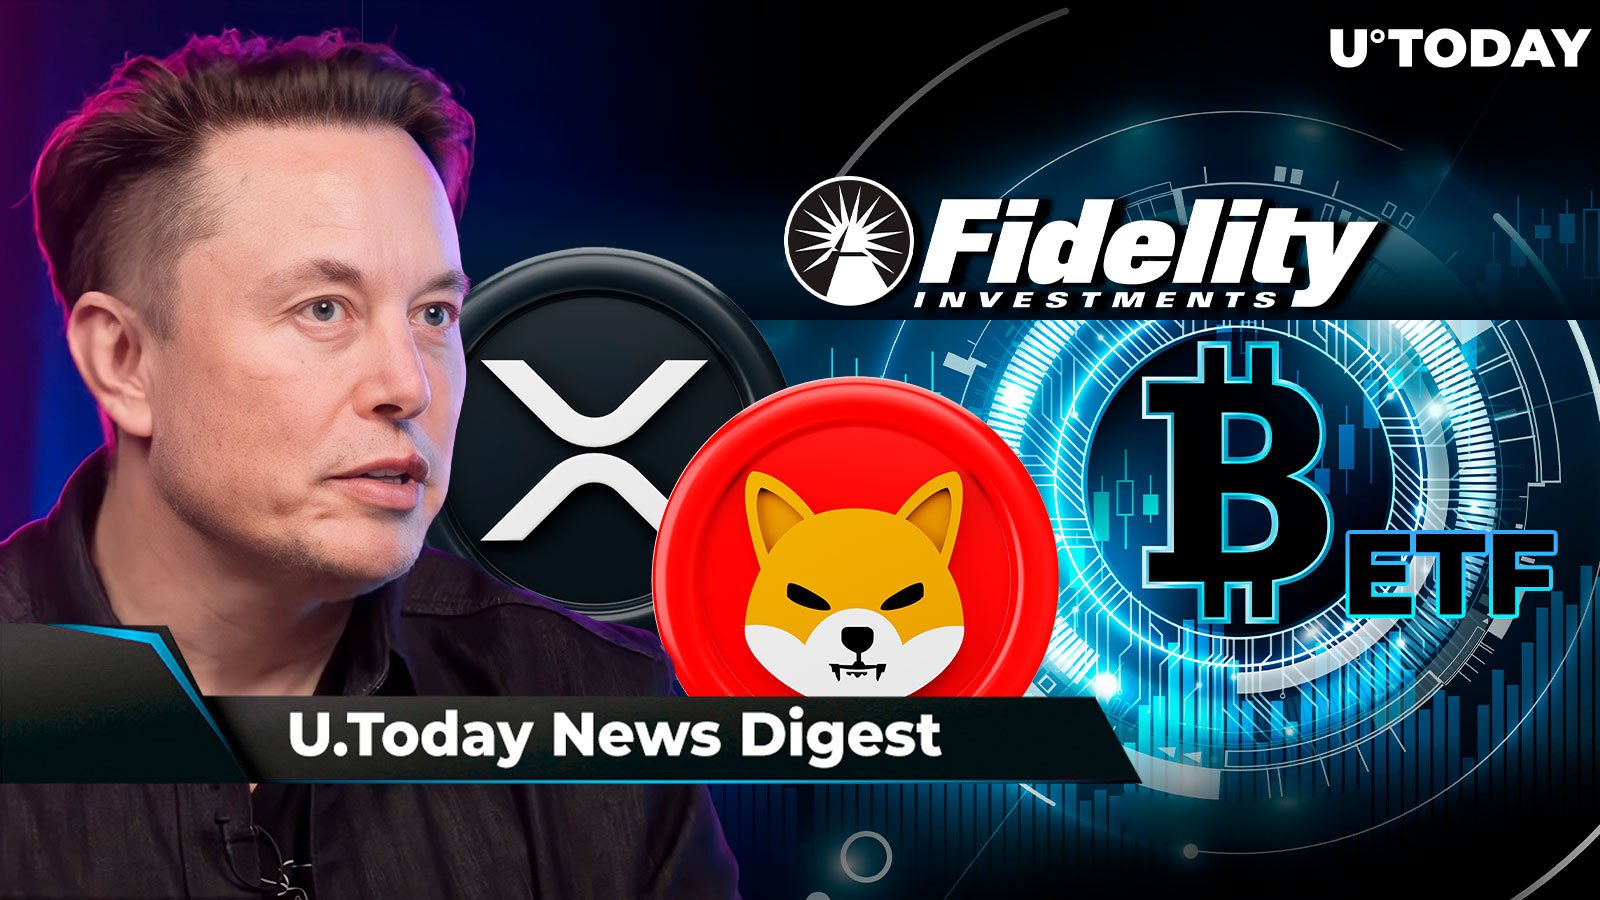 Ripple Partner Scores Major Partnership, Fidelity Files Updated Bitcoin ETF Application, Elon Musk's New Post Triggers Response from XRP and SHIB Fans: Crypto News Digest by U.Today